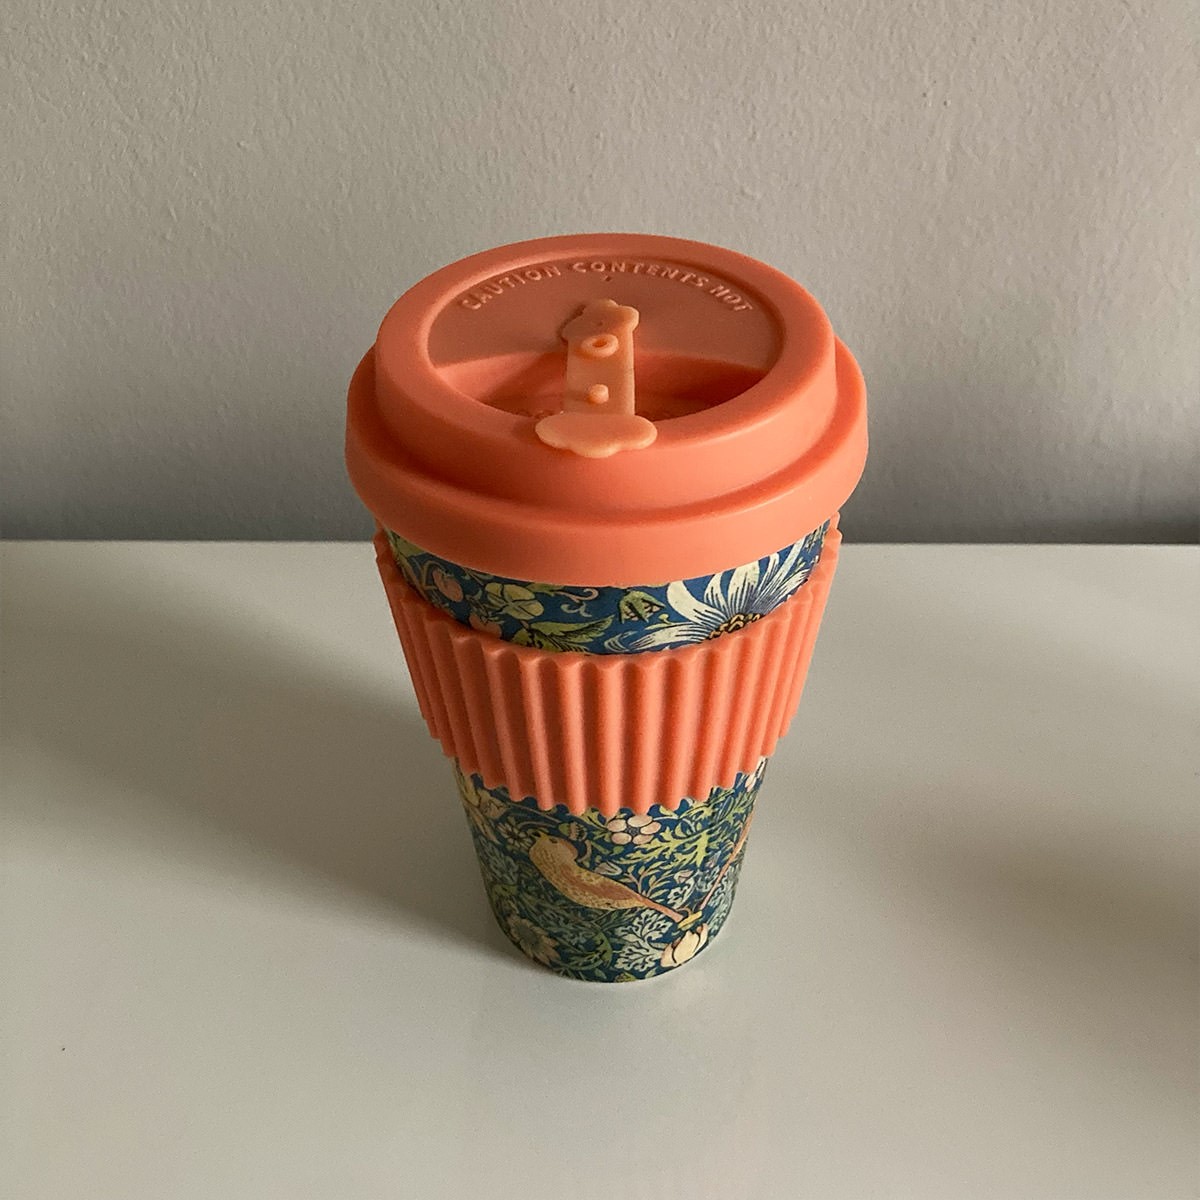 Superfried – Walk the Talk. Testing eco friendly reusable cups – eCoffee Cups. Continuing my path towards eco living.